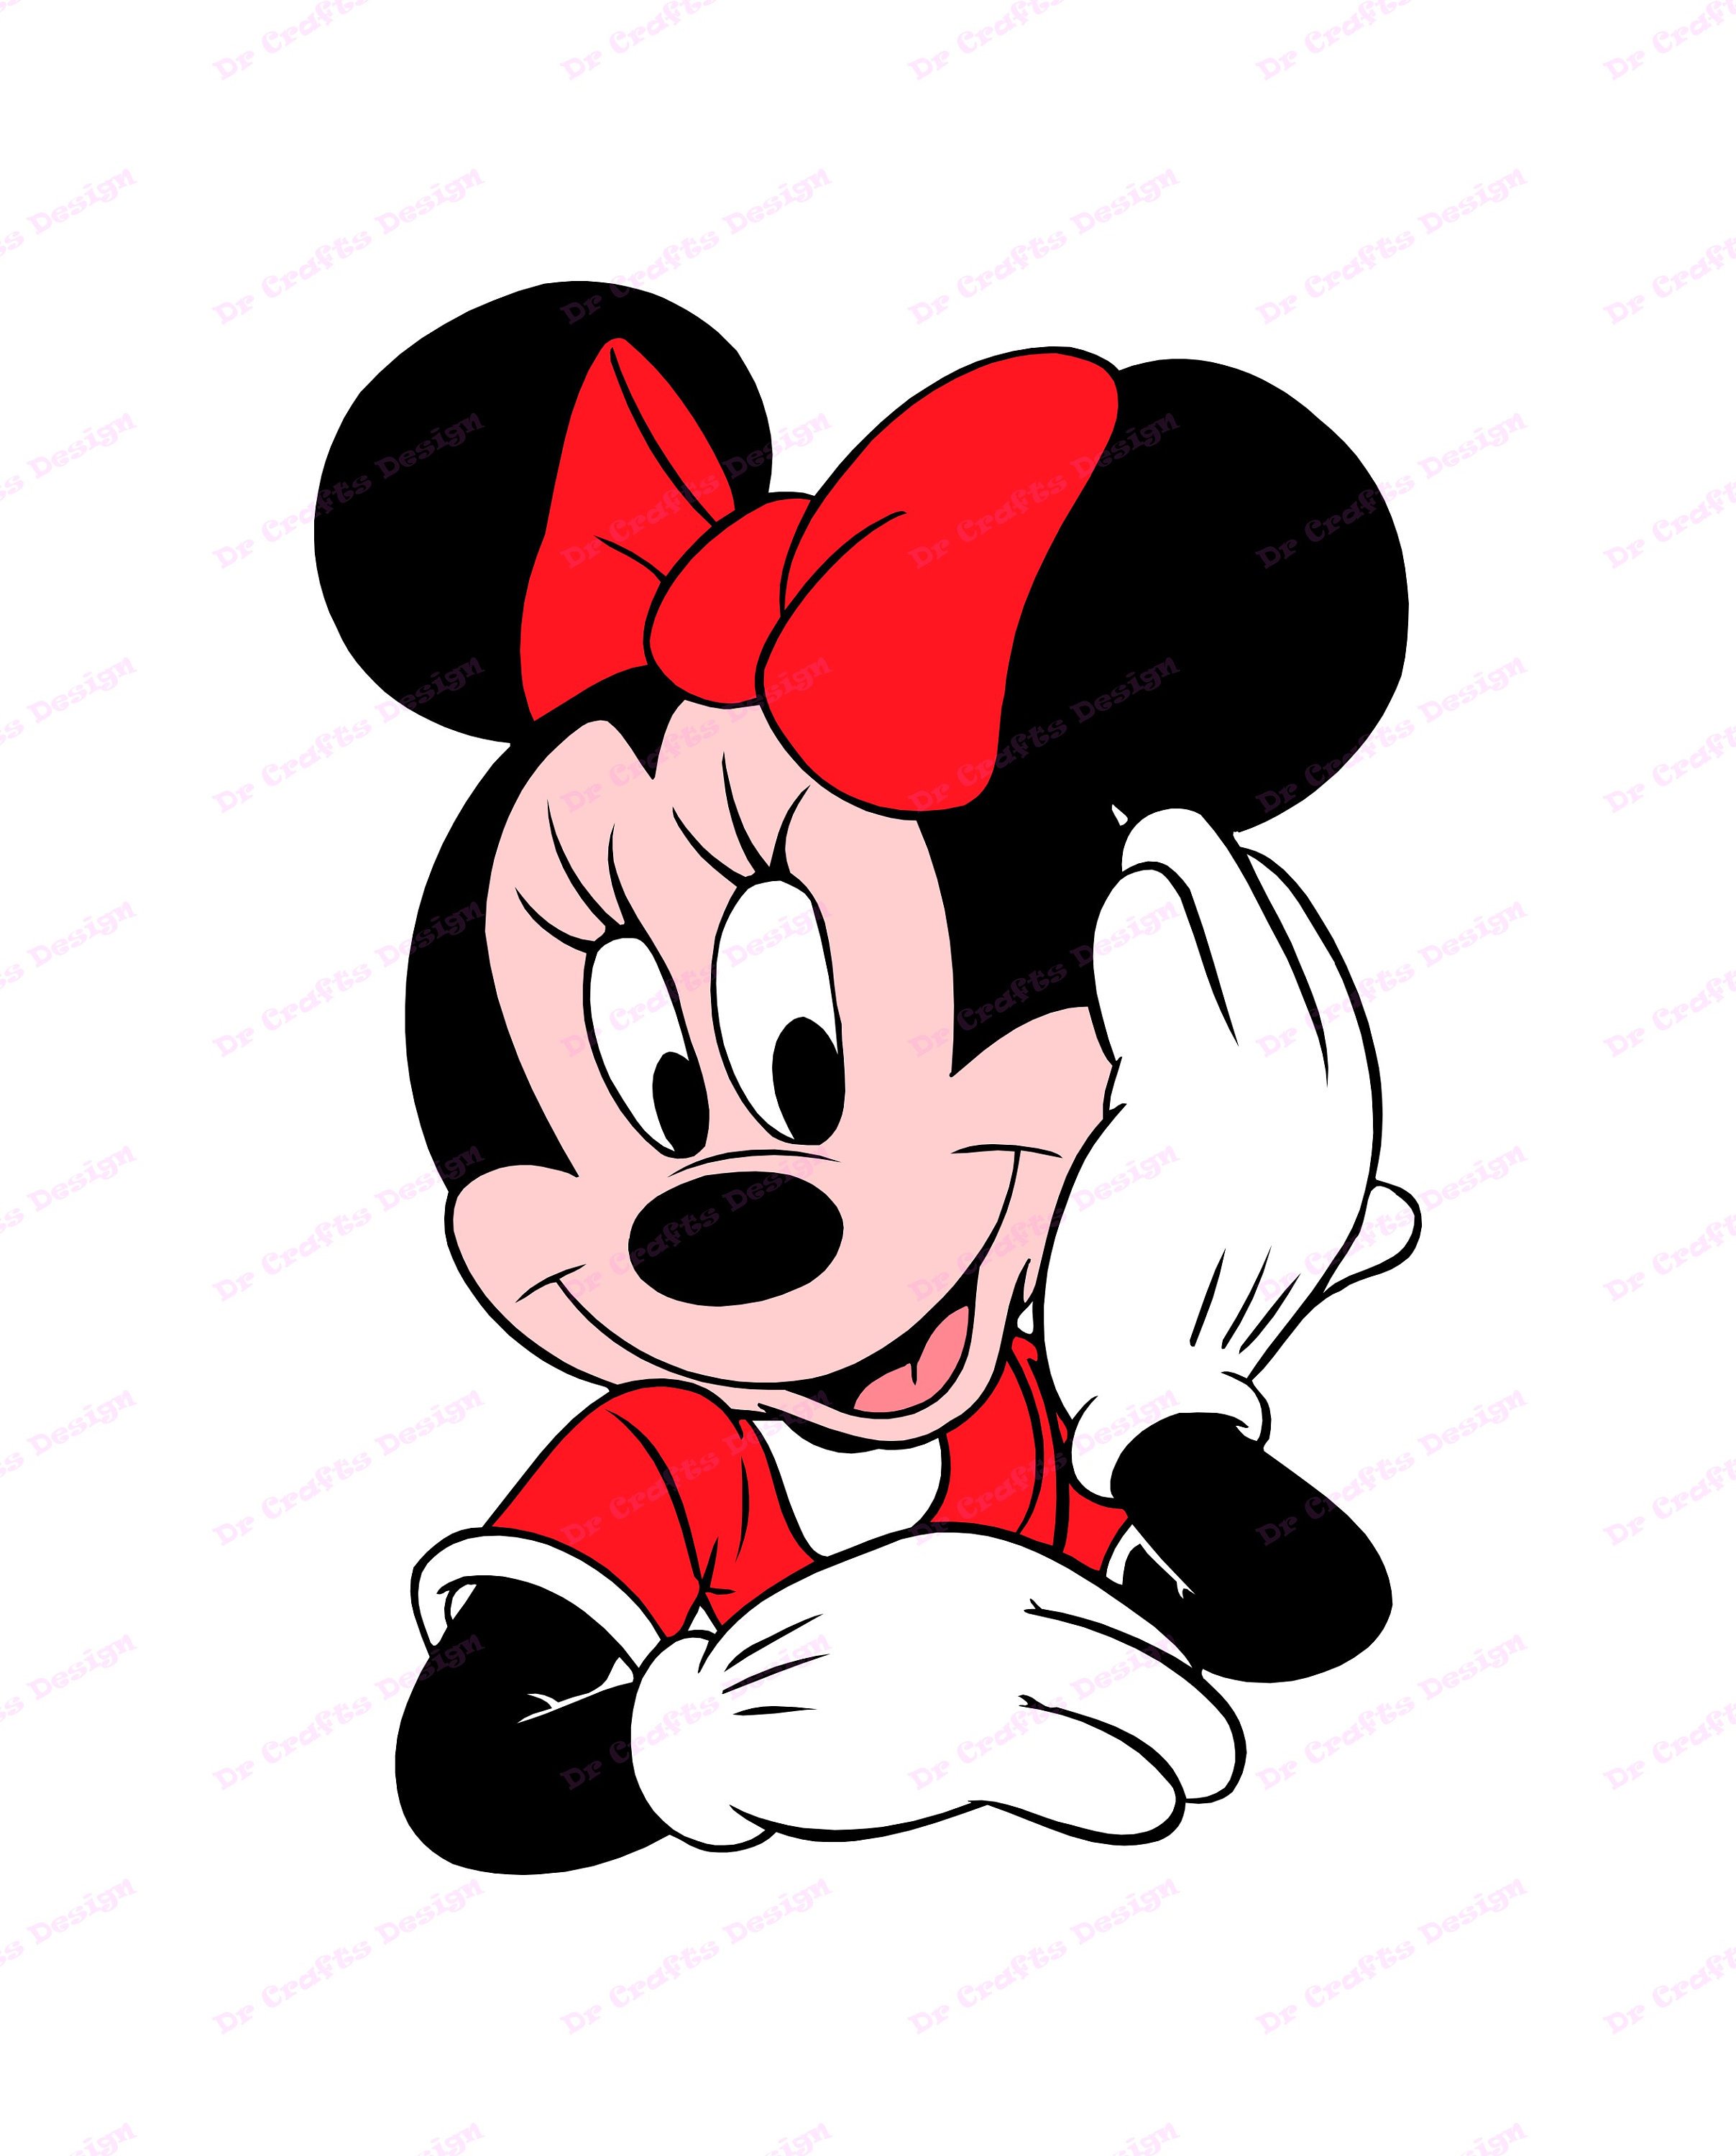 Silhouette Minnie Mouse Svg - 579+ Popular SVG File - Fee SVG Assets